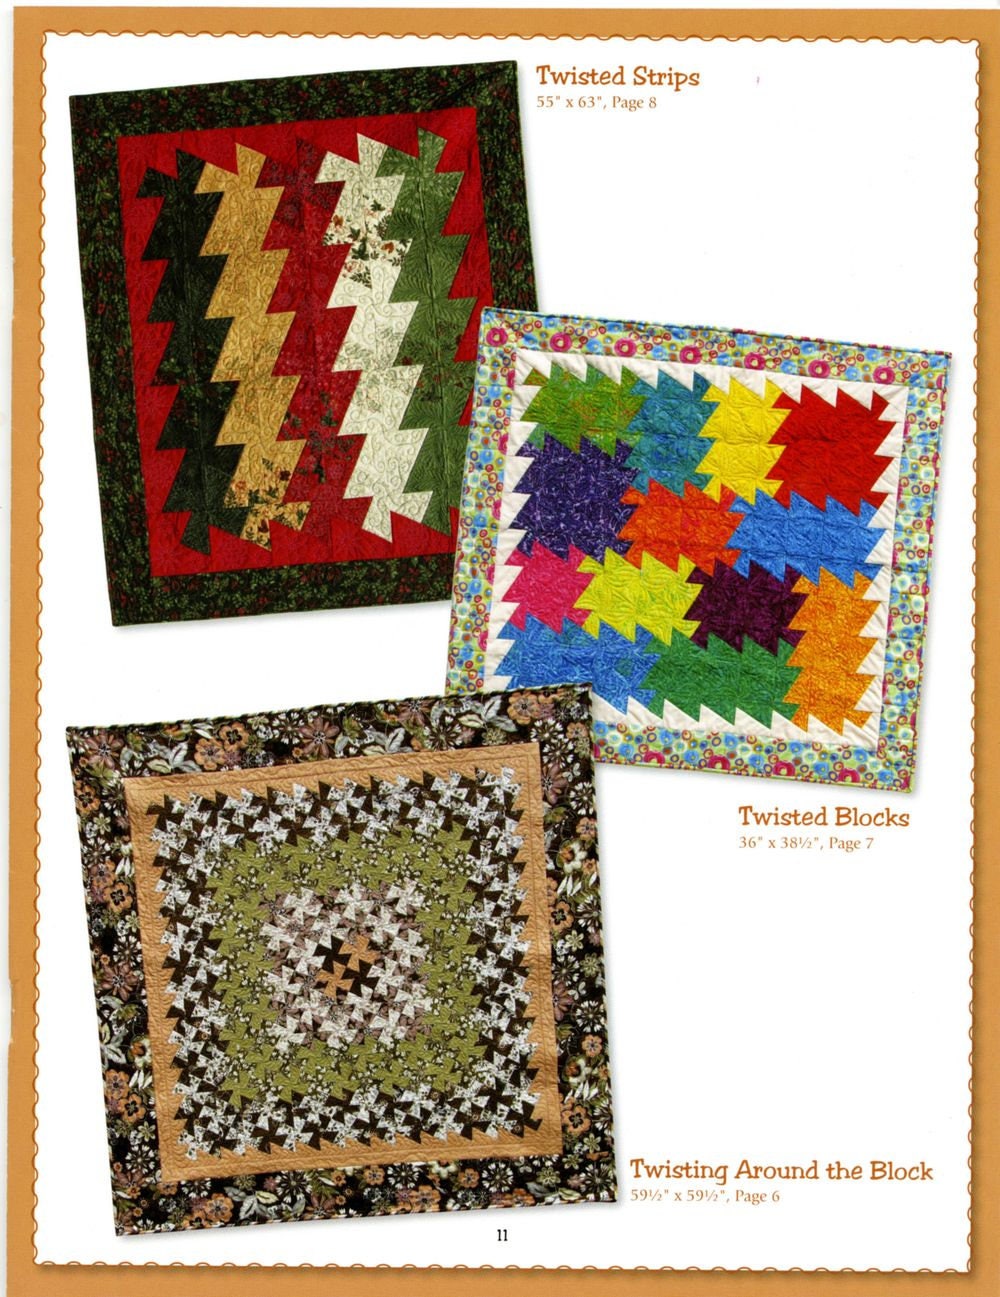 Let's Twist One More Time Quilt Pattern Book by Marsha Bergren for Twister Sisters